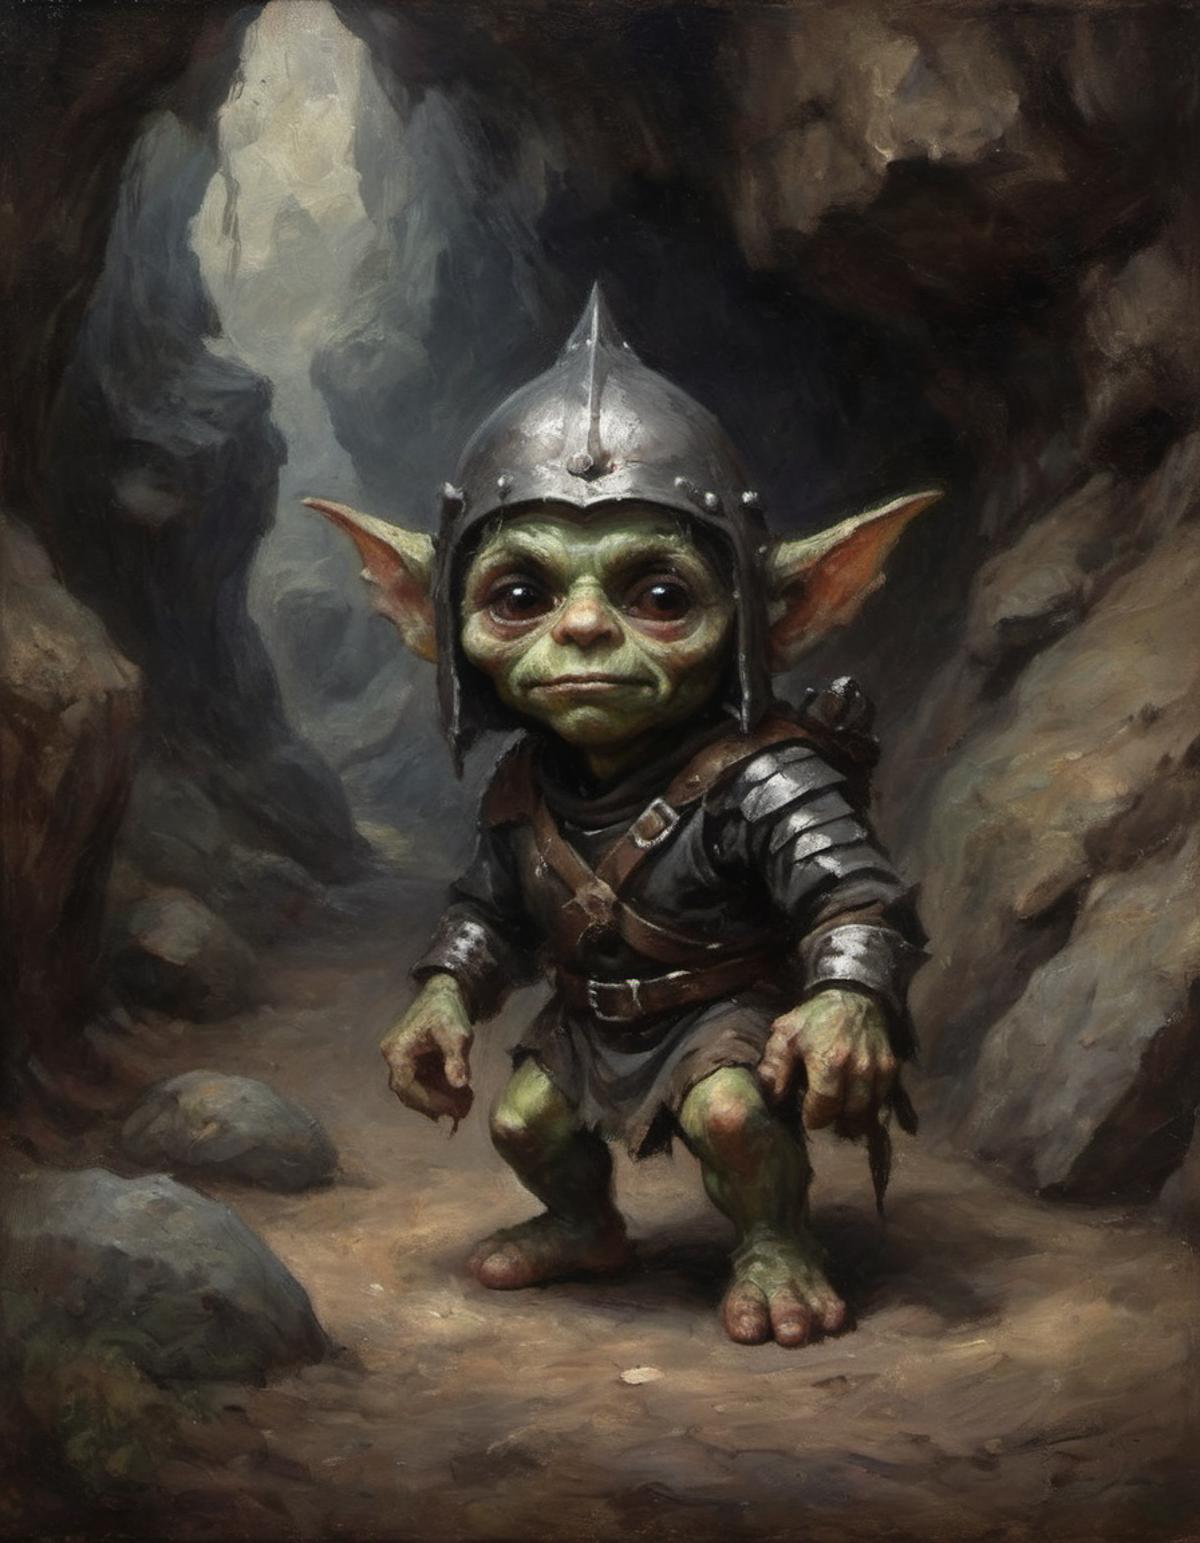 A painting of a green, pointy-eared creature wearing armor and a helmet.